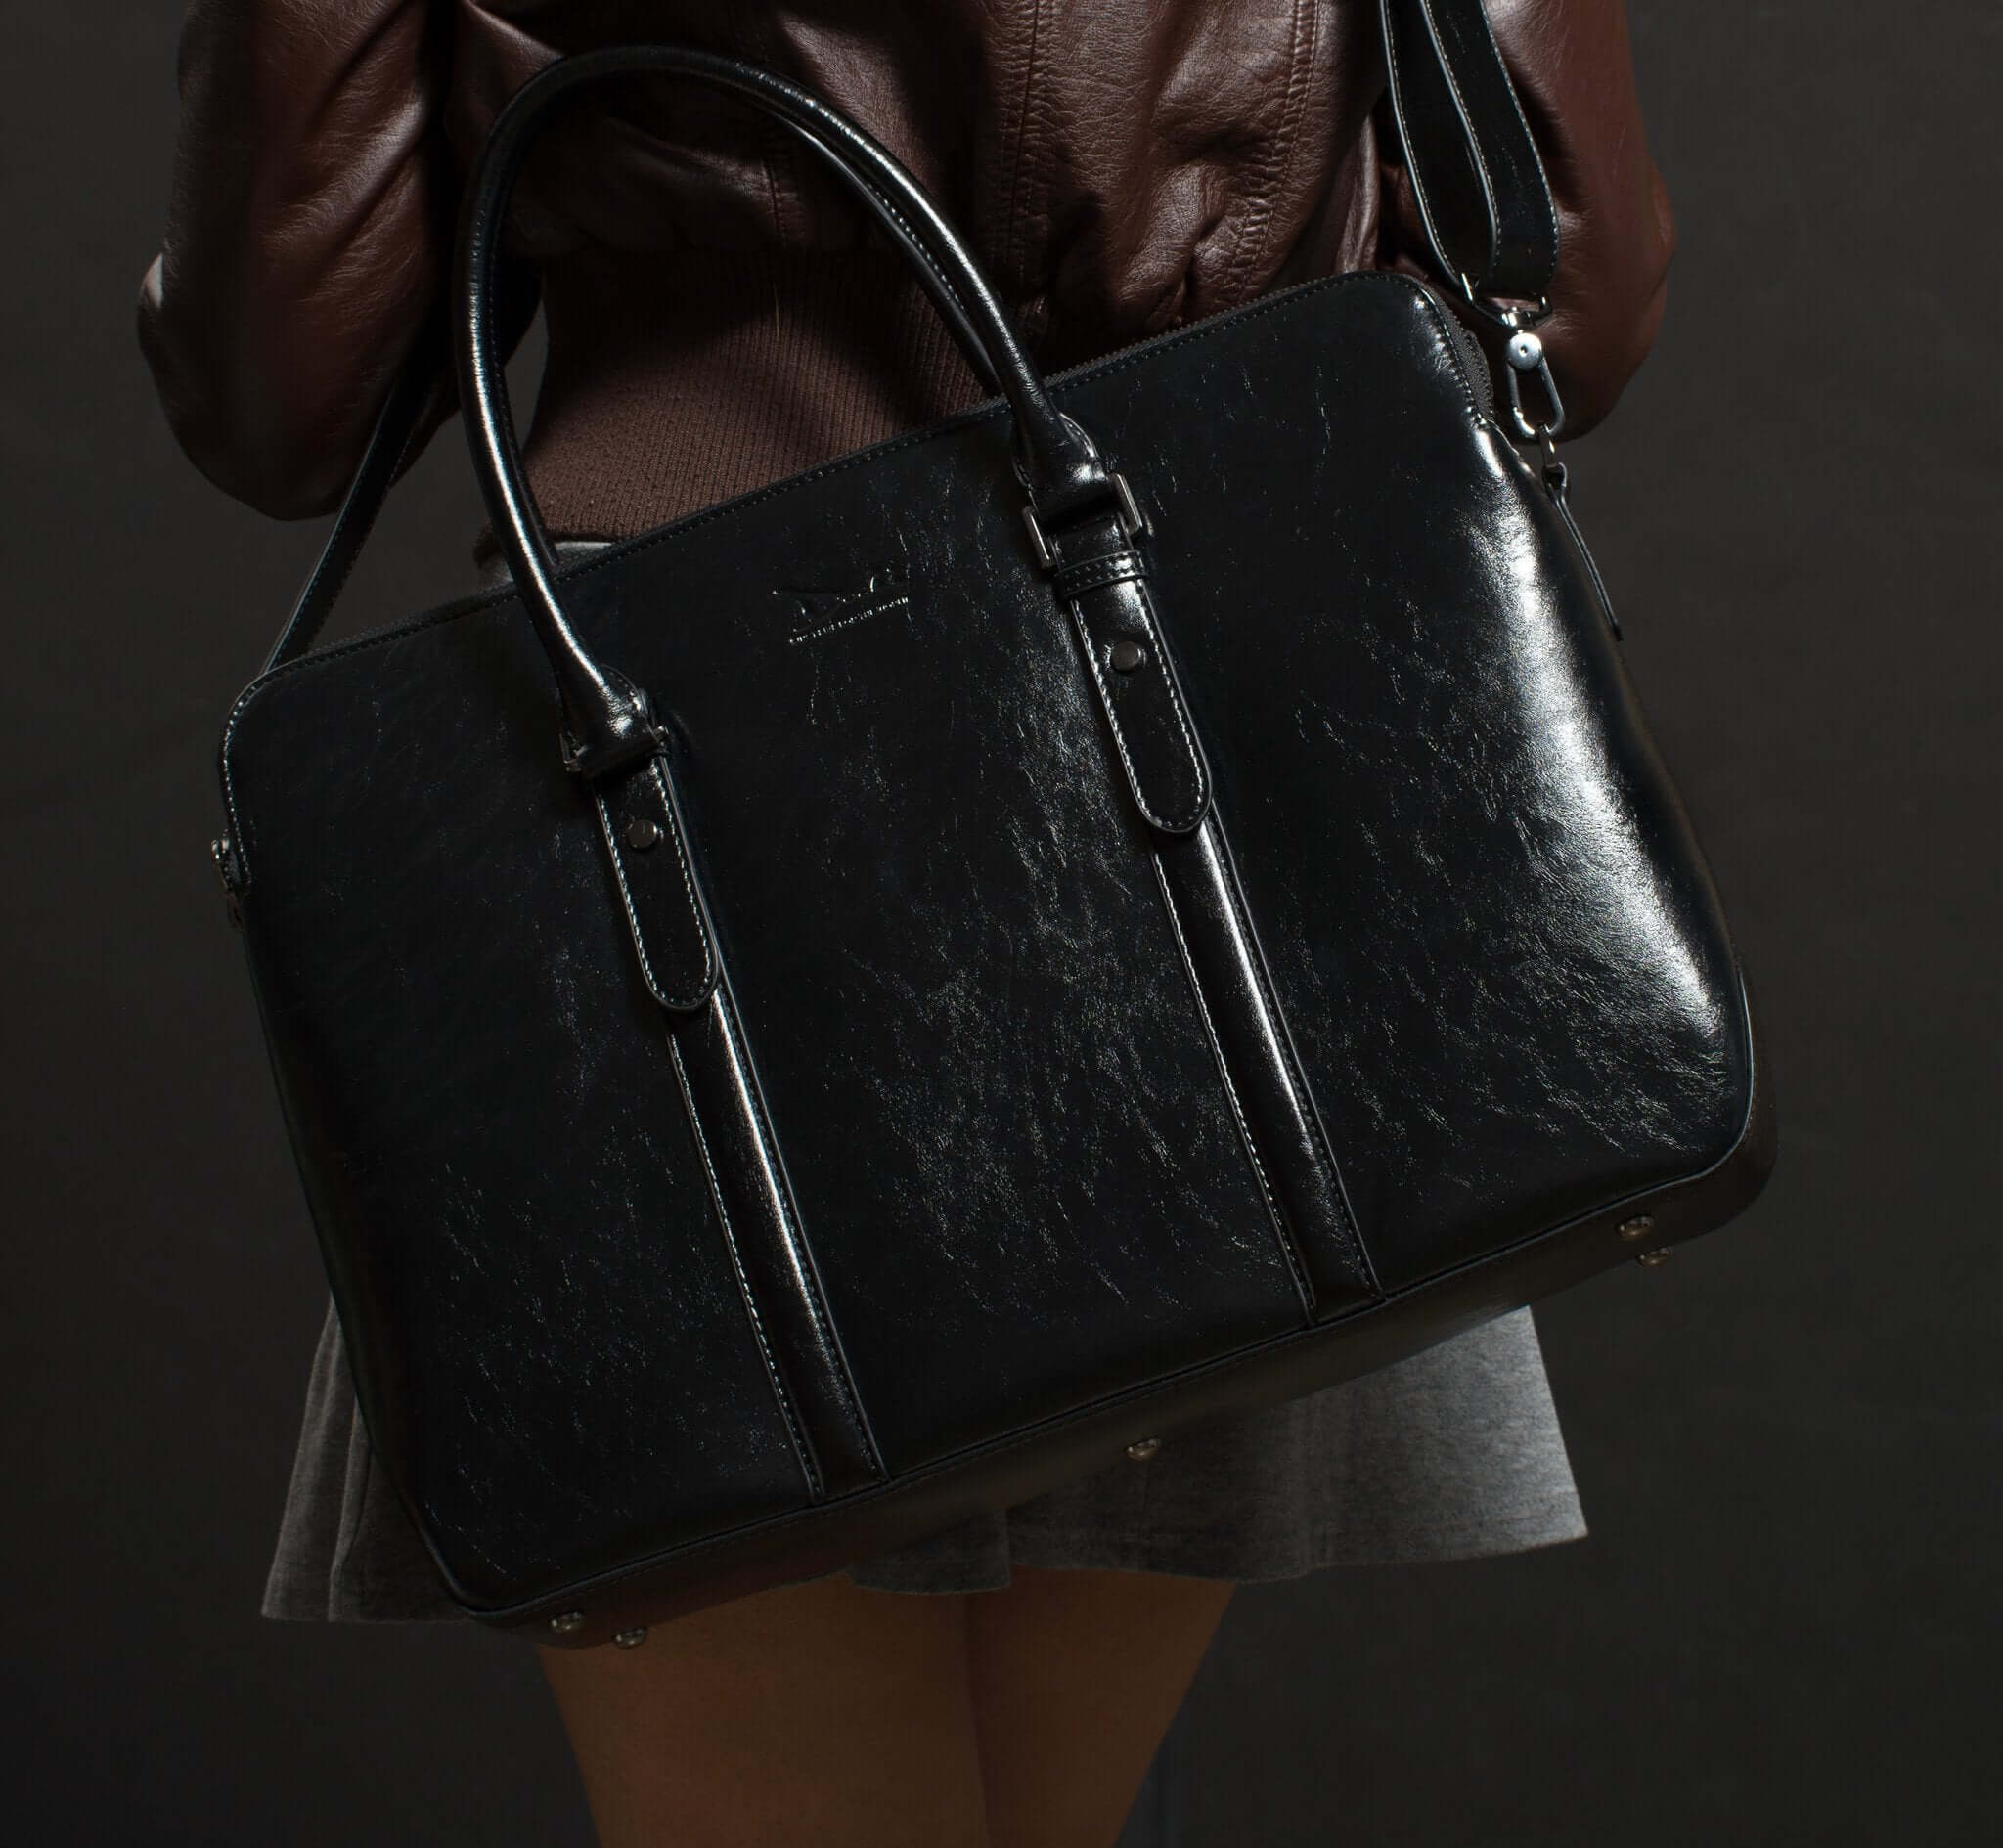 Meet Doshi FCSA ~ Leader's in High-Quality Vegan Leather